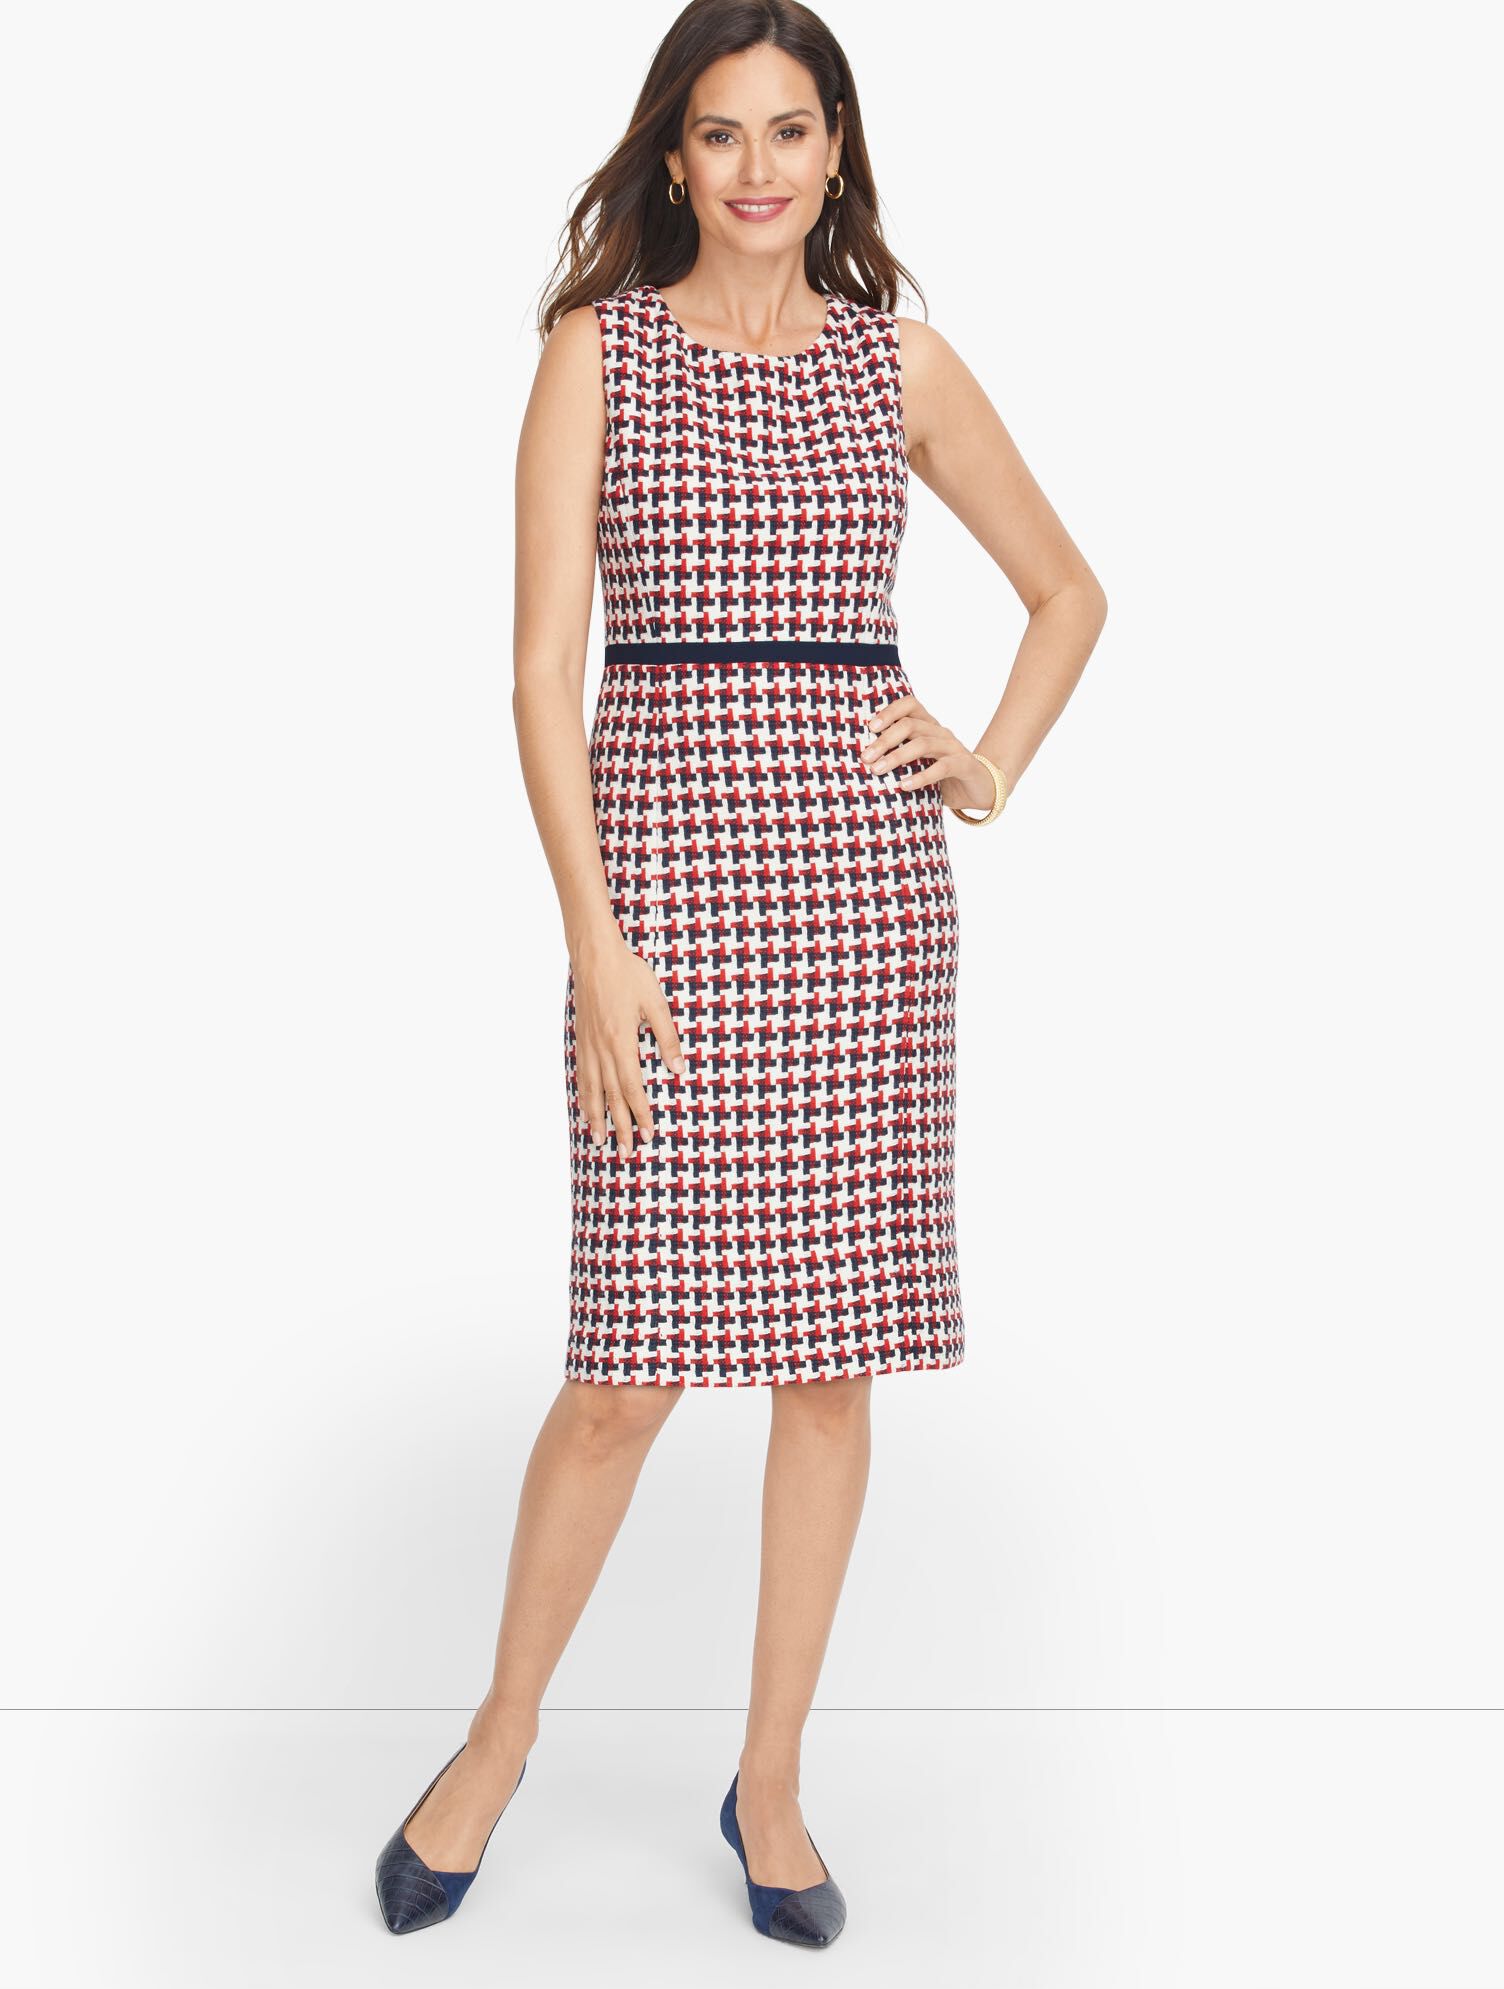 Luxe Woven Bold Houndstooth Sheath Dress